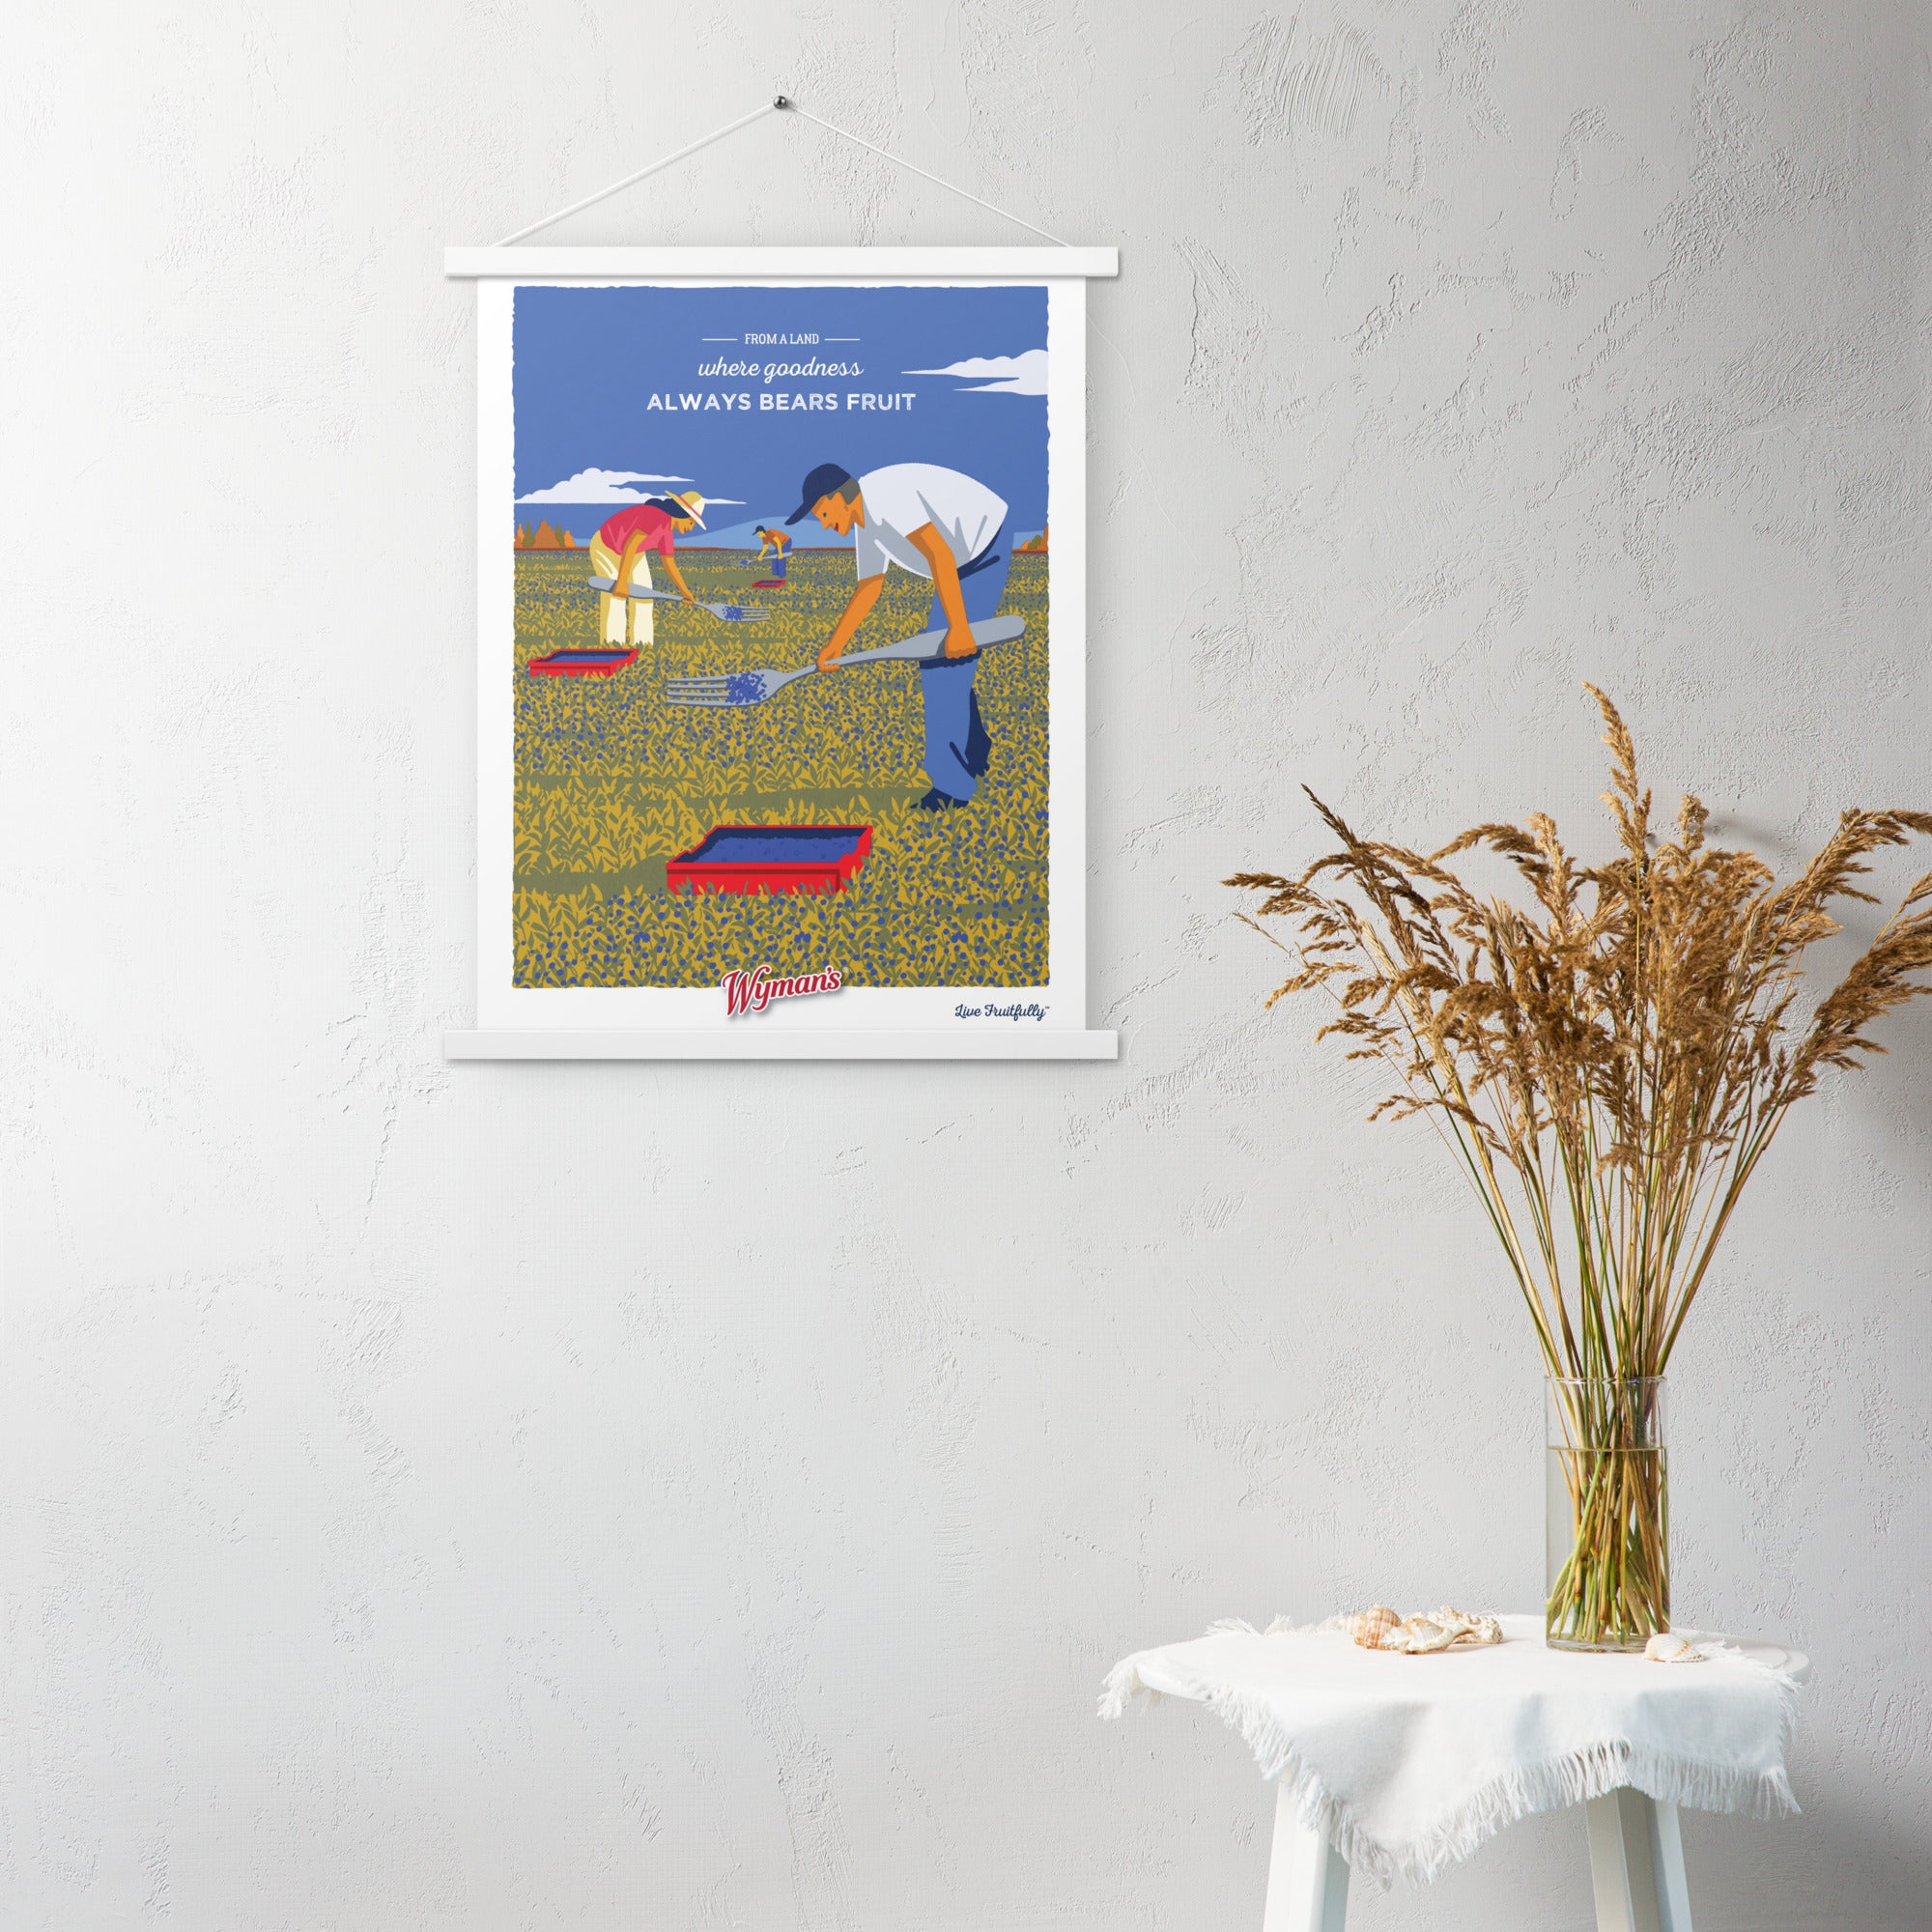 A Shop Wyman's "From a Land Where Goodness Always Bears Fruit" poster with an image of a man in a field of blueberries.